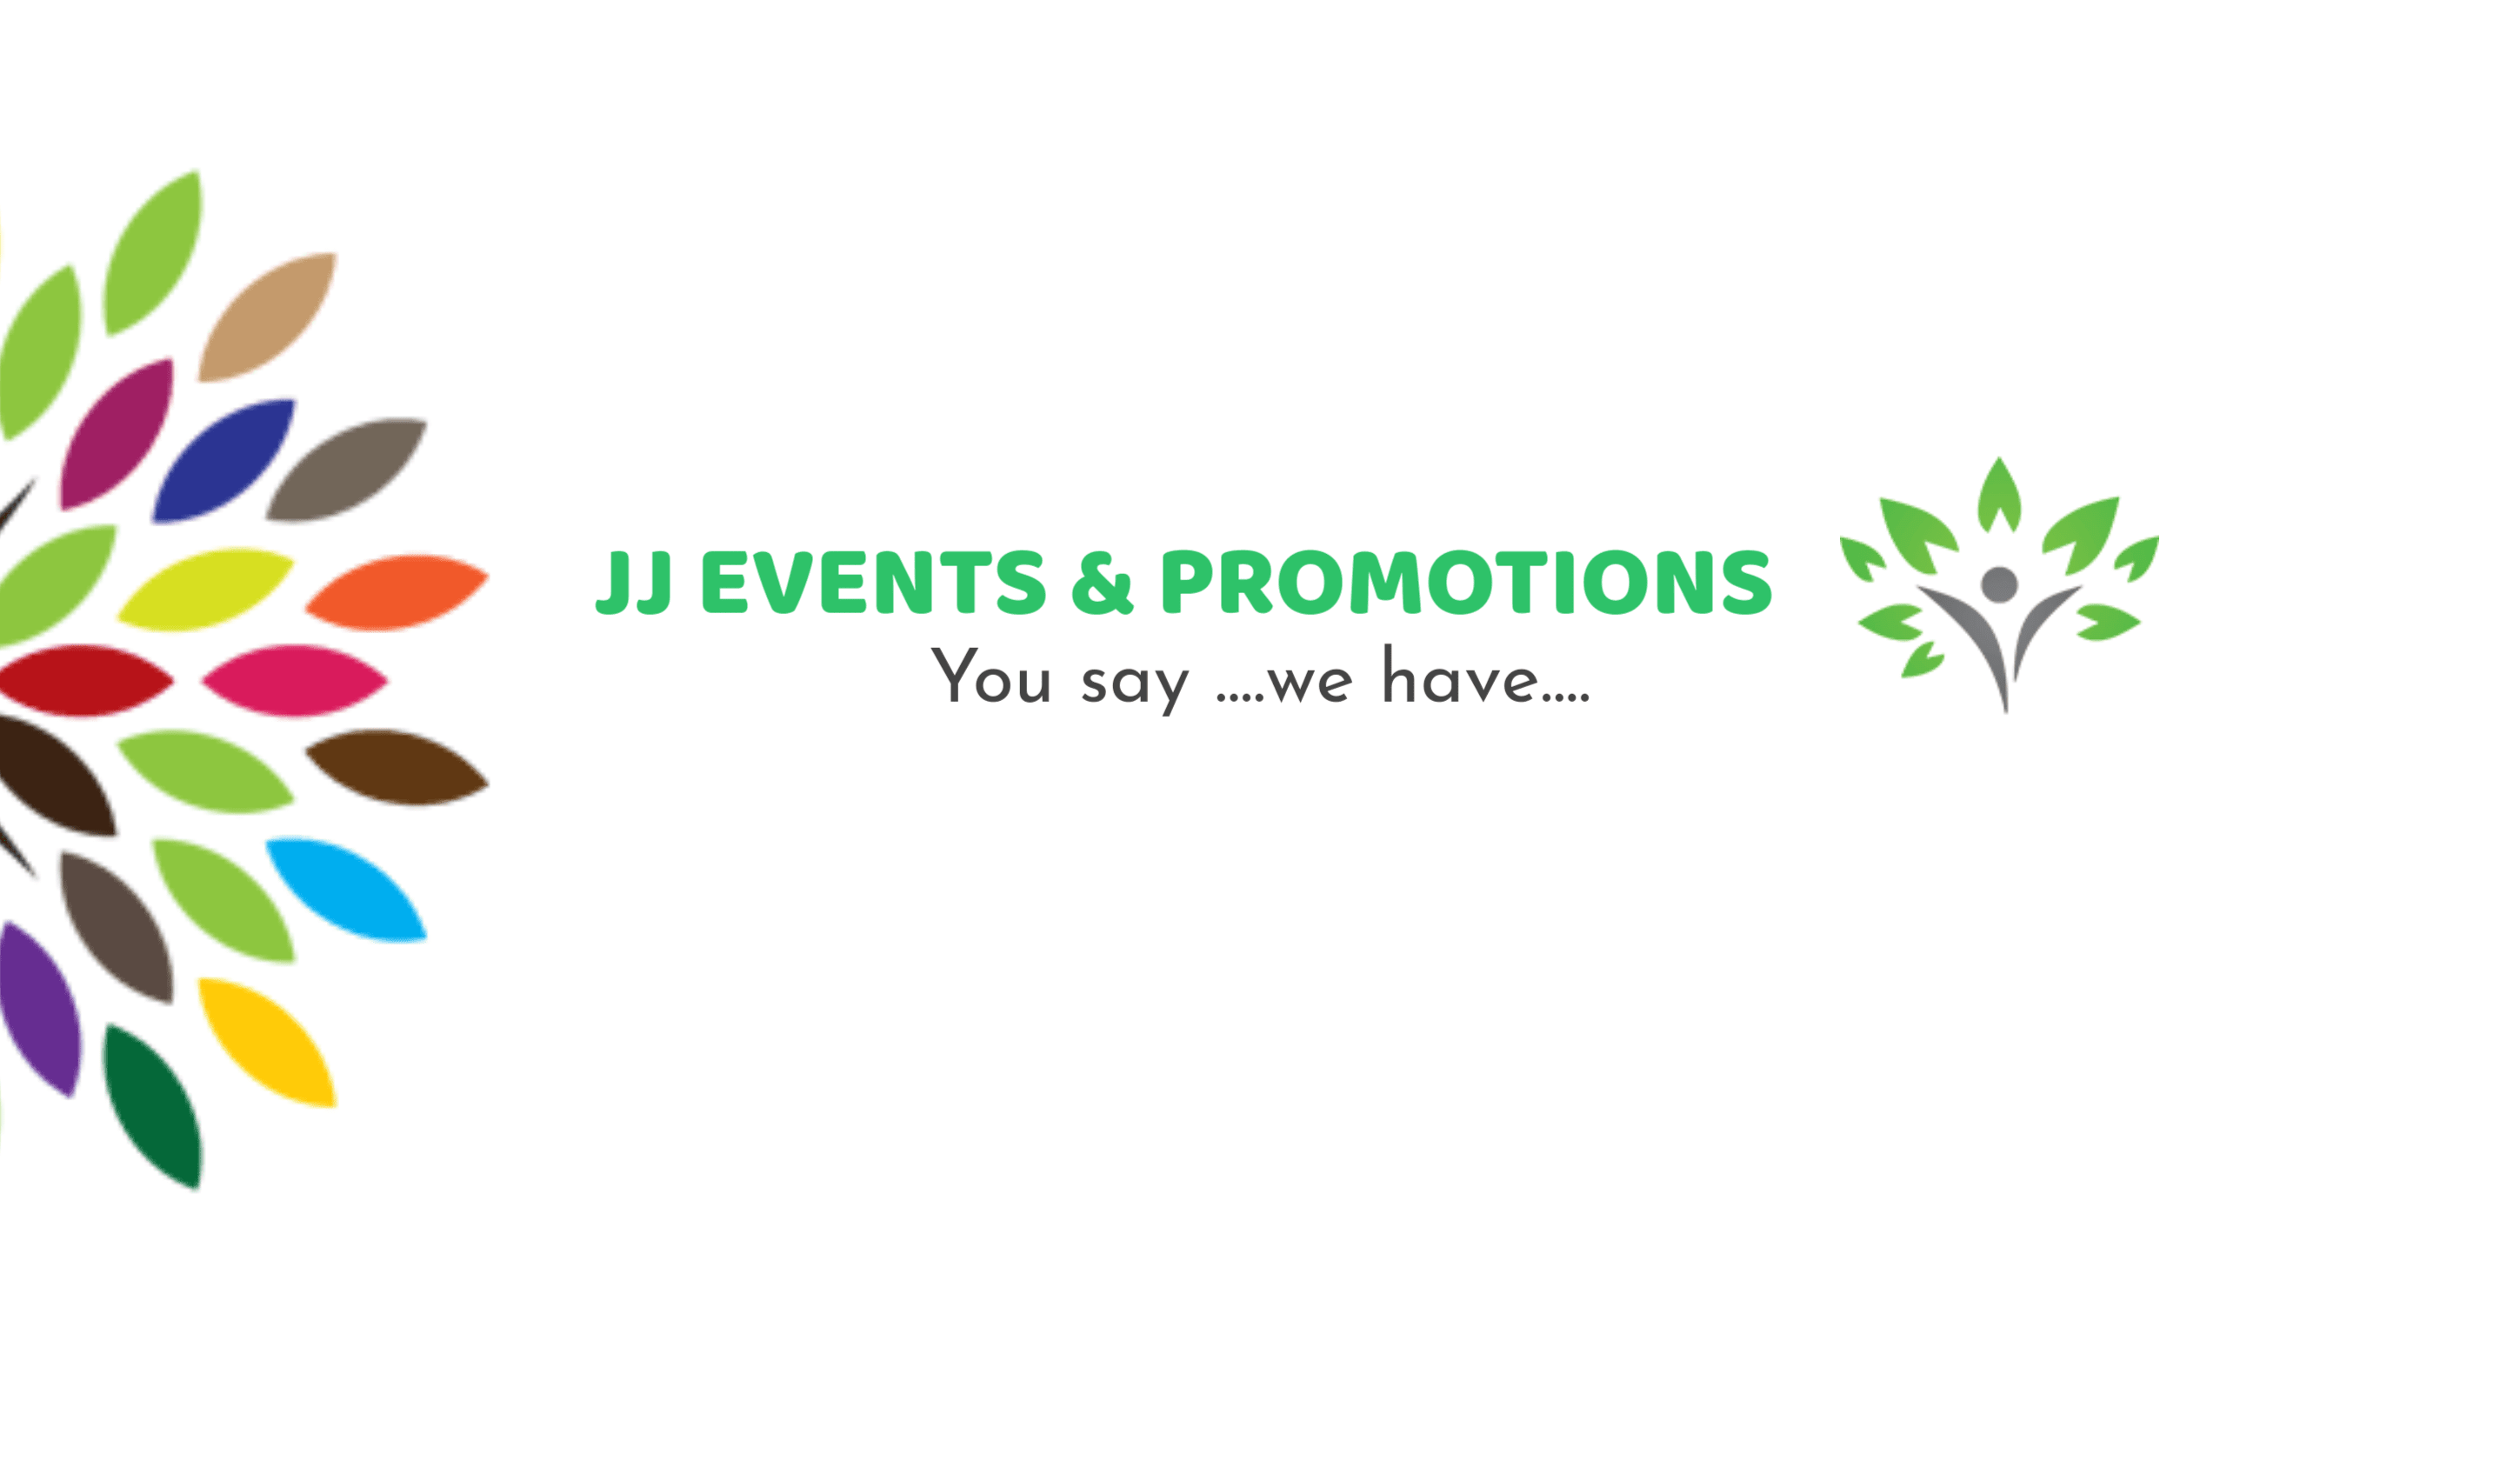 JJ Events